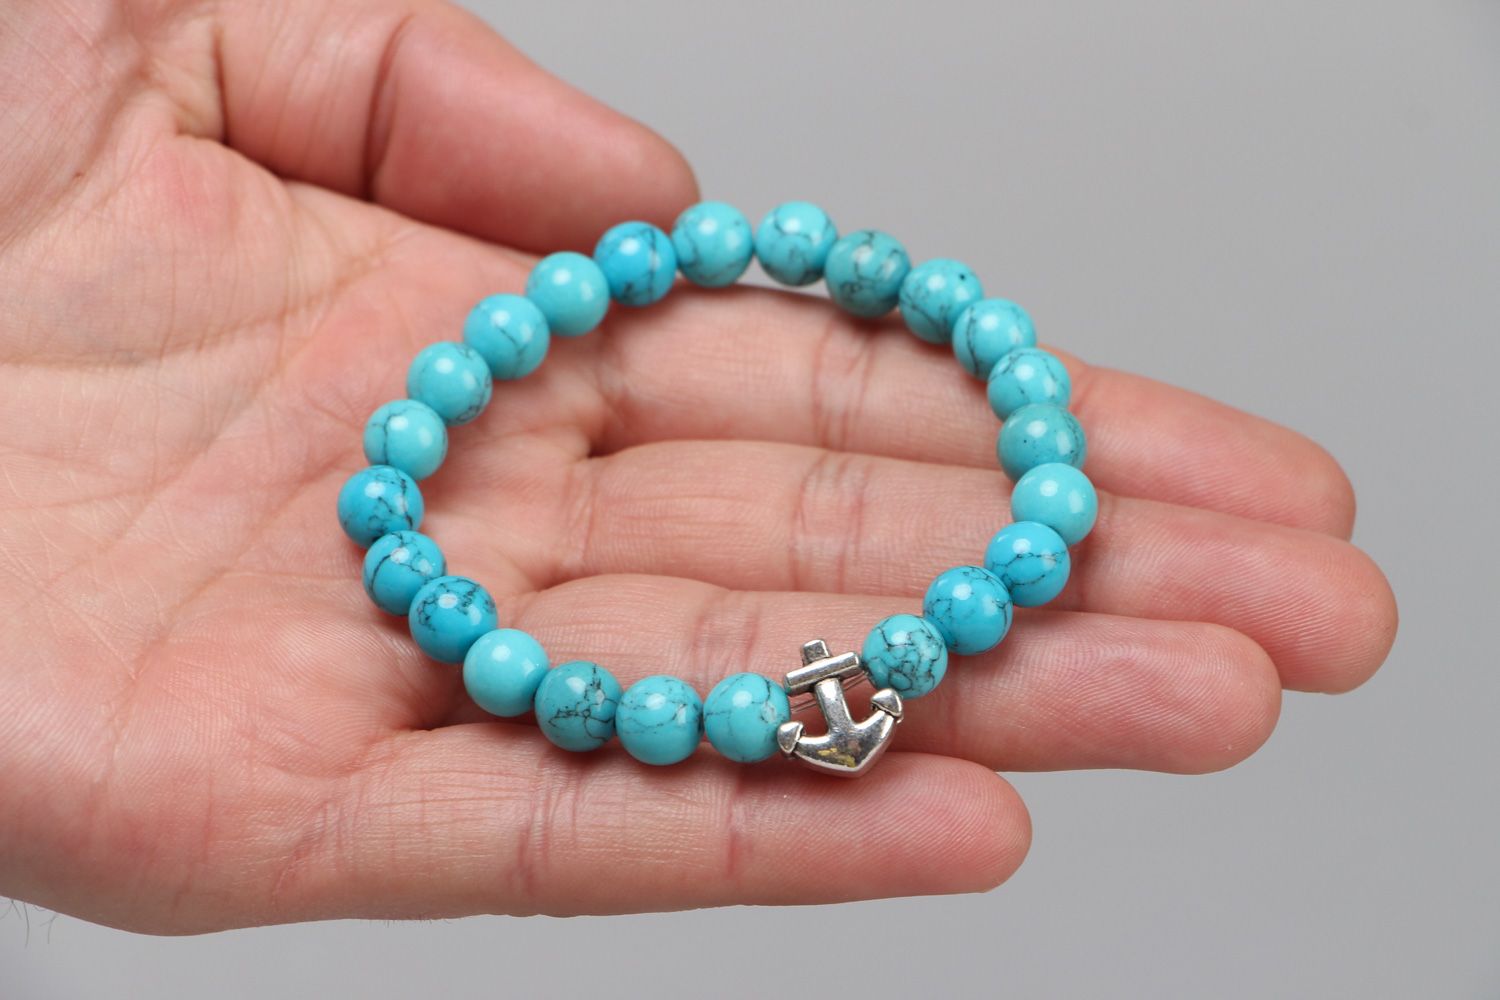 Handmade wrist stretch bracelet with turquoise beads and metal anchor charm photo 3